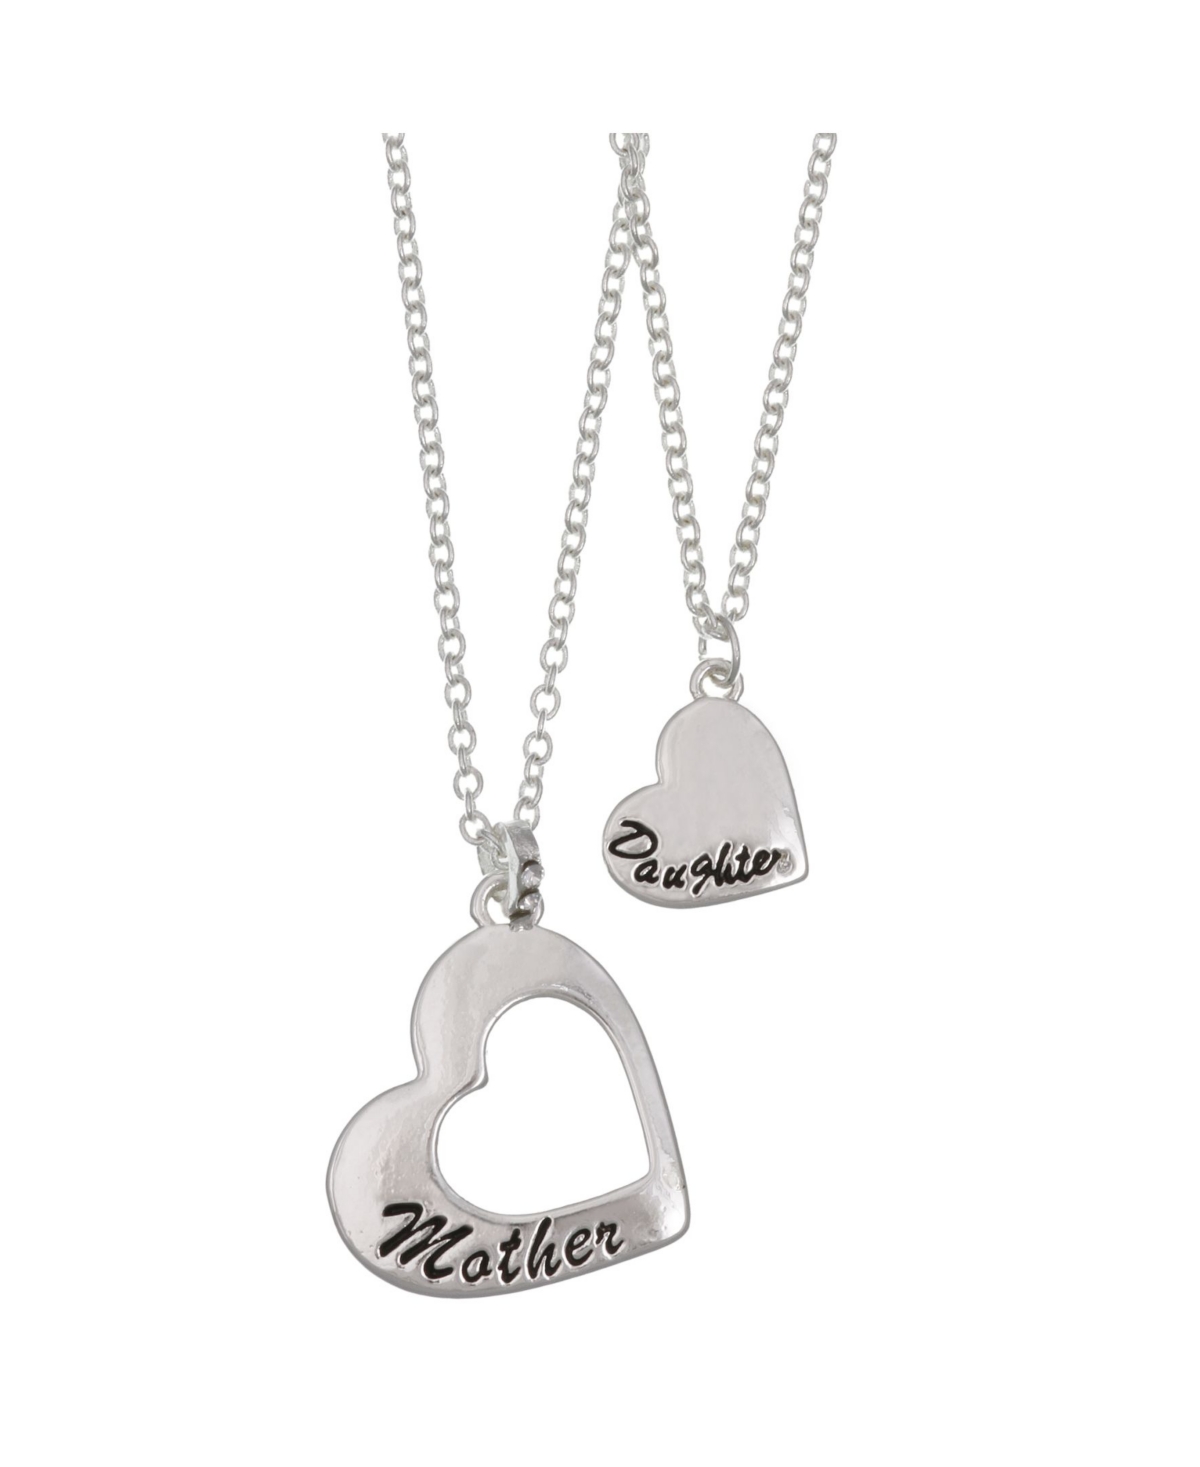 Mother and Daughter Silver Tone Heart Pendant Necklace Set, 2 Piece - Silver-Tone